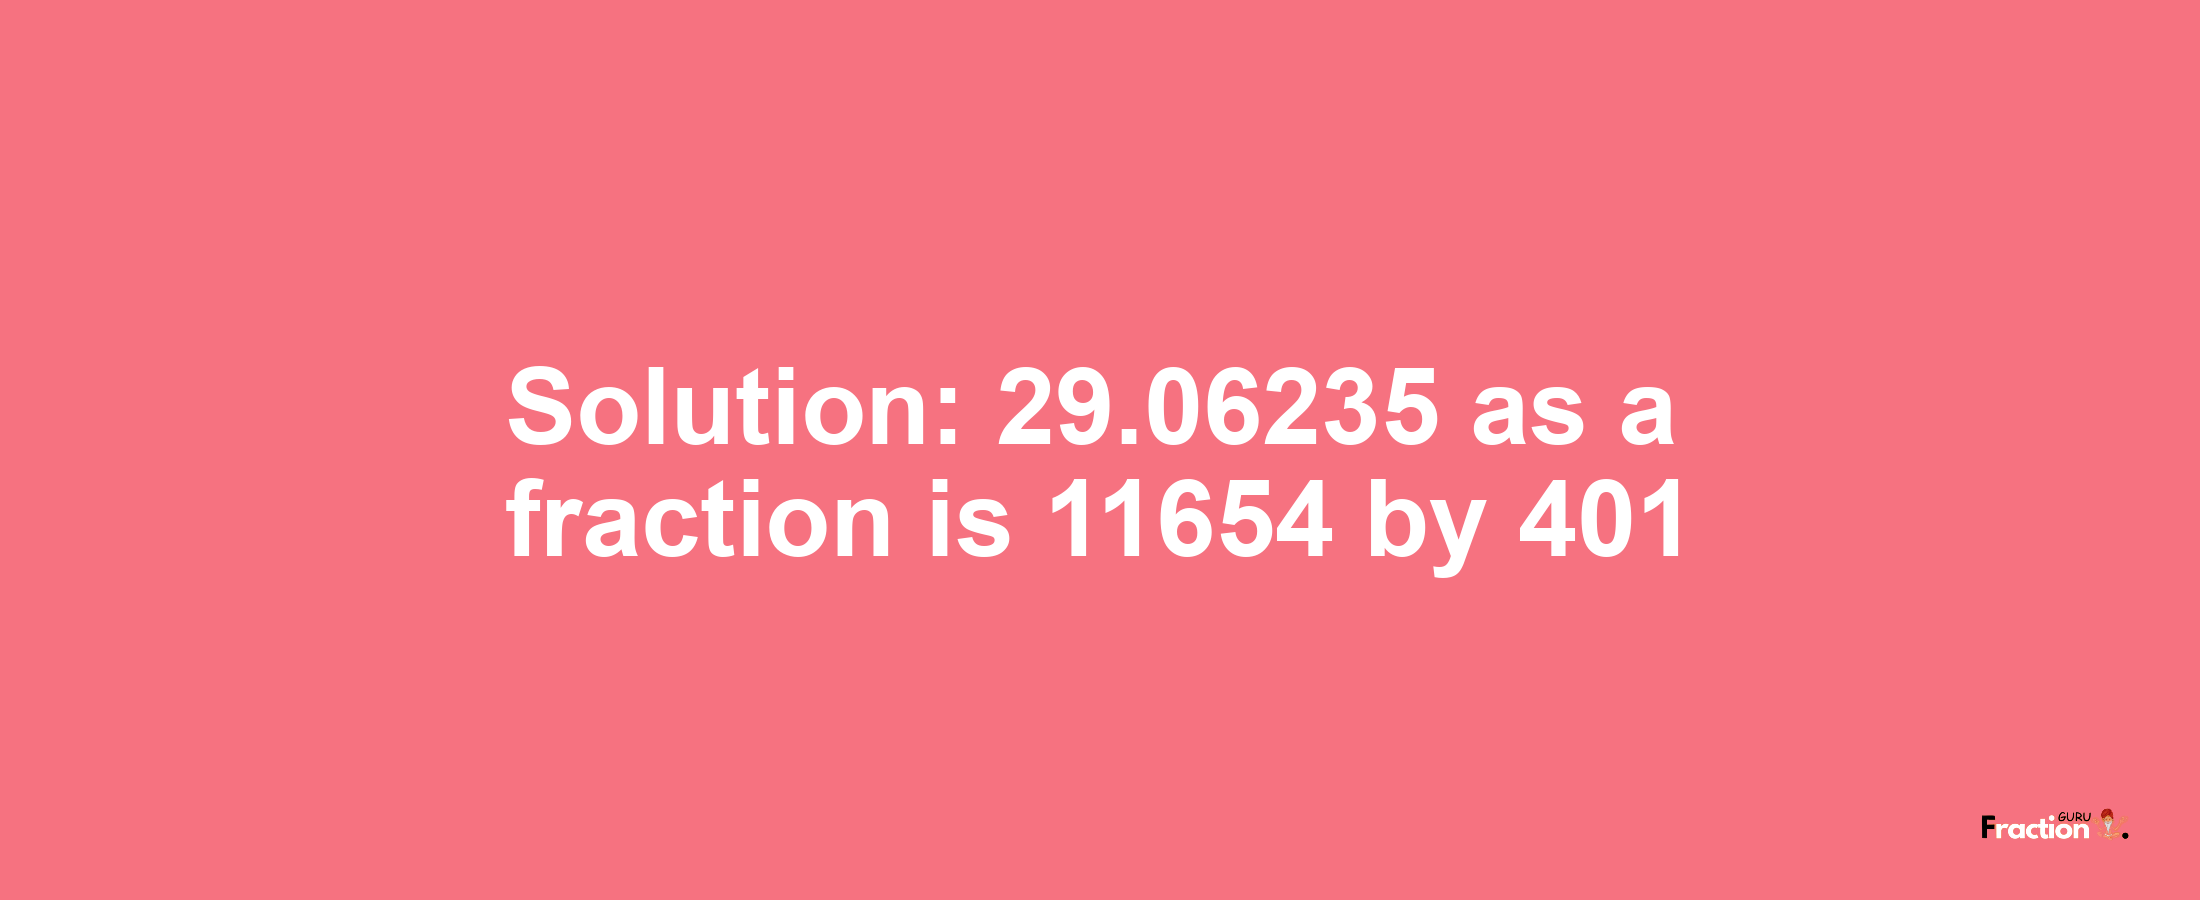 Solution:29.06235 as a fraction is 11654/401